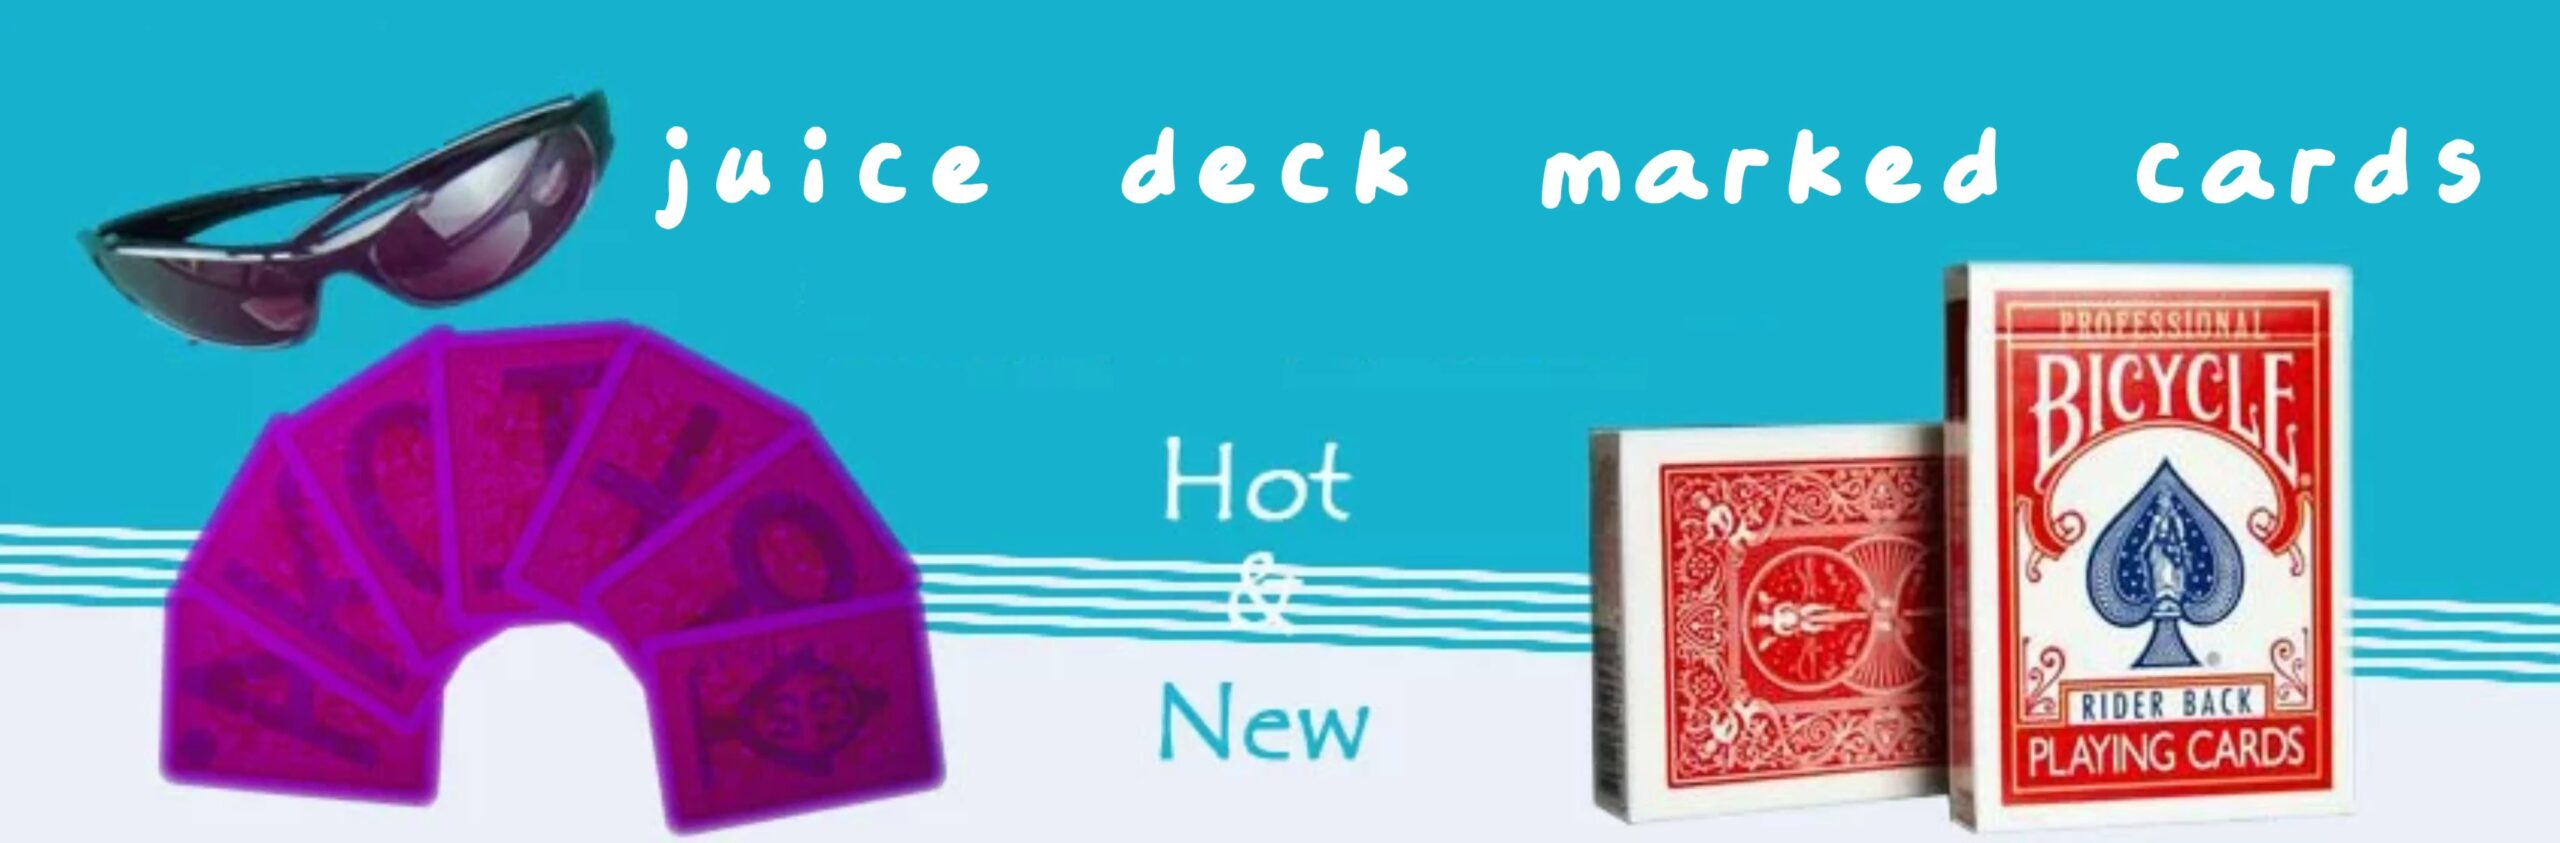 juiced deck marked cards